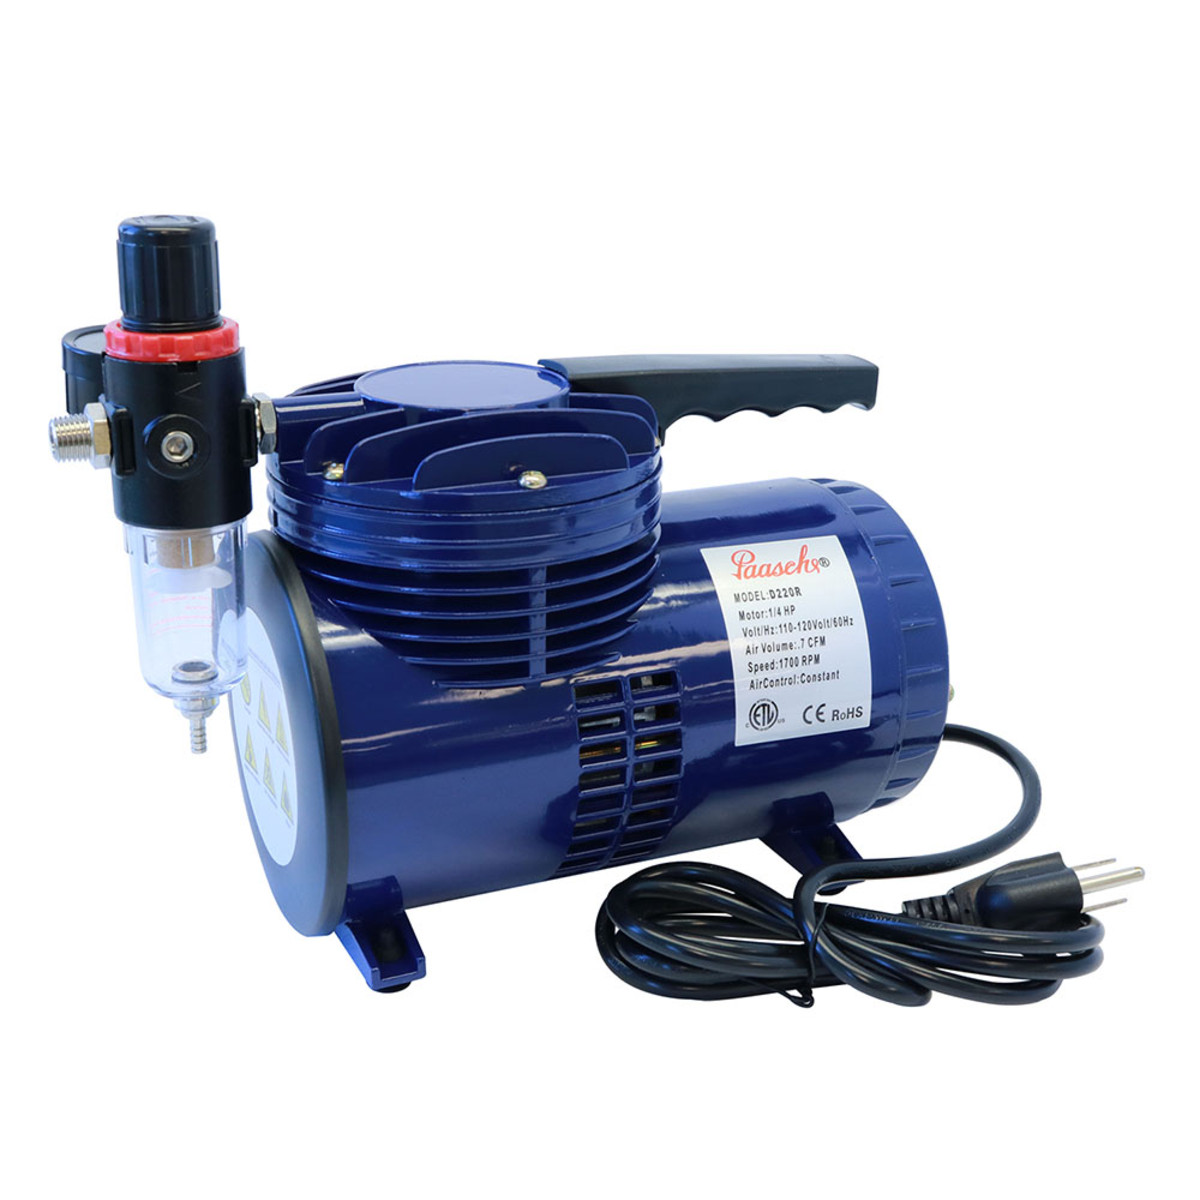 D220r 1 By 6 Hp Diaphragm Compressor With Regulator